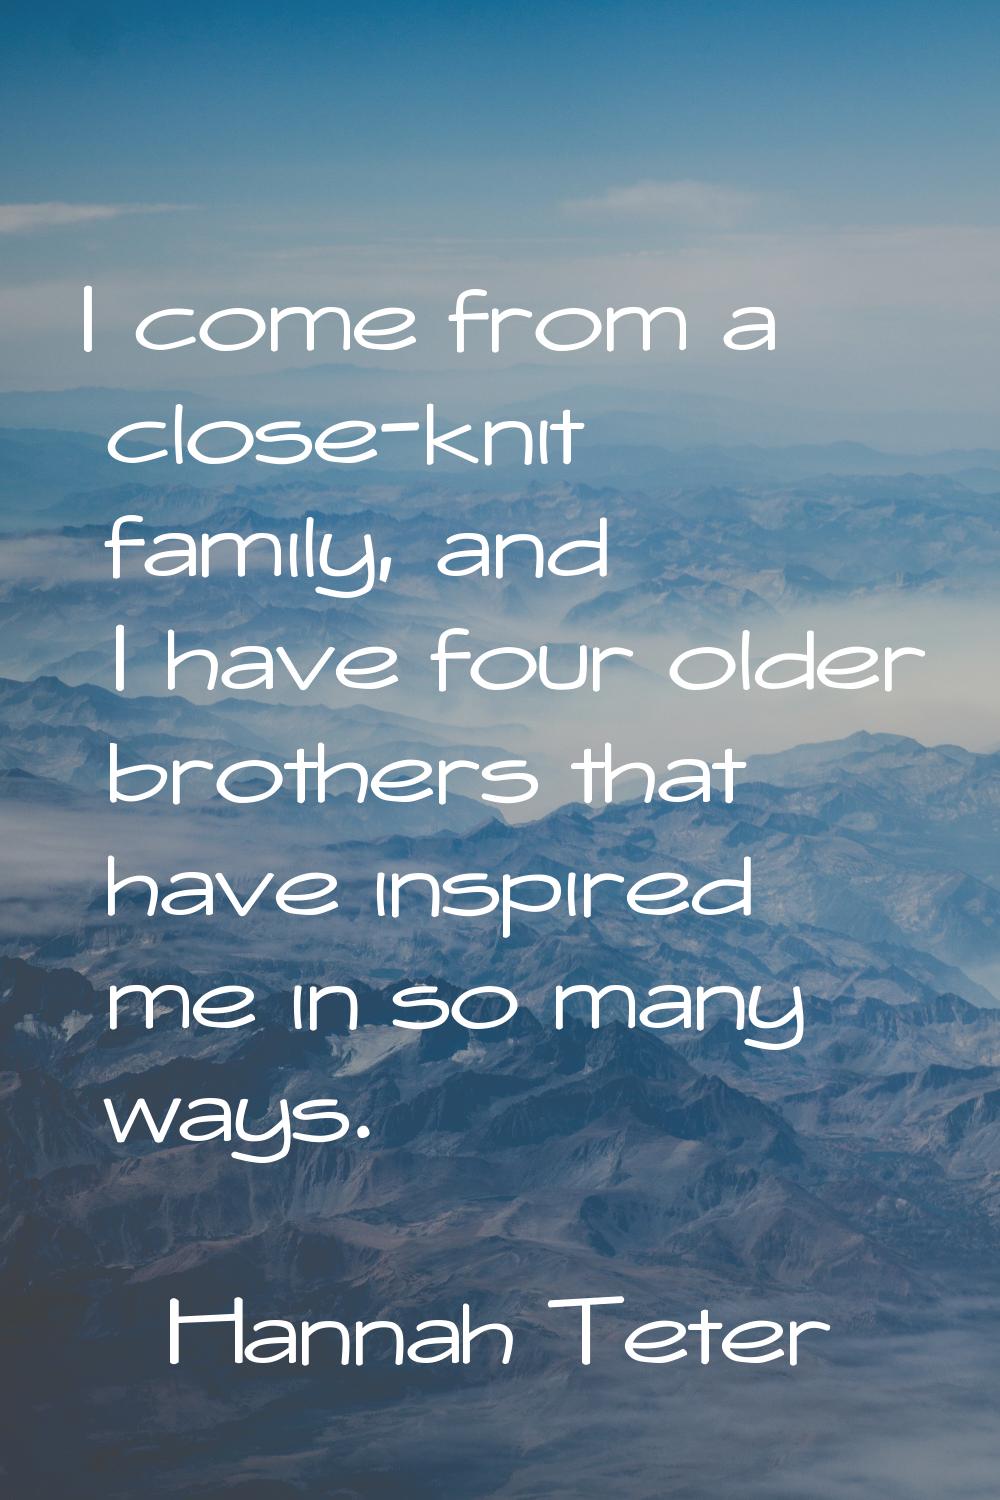 I come from a close-knit family, and I have four older brothers that have inspired me in so many wa